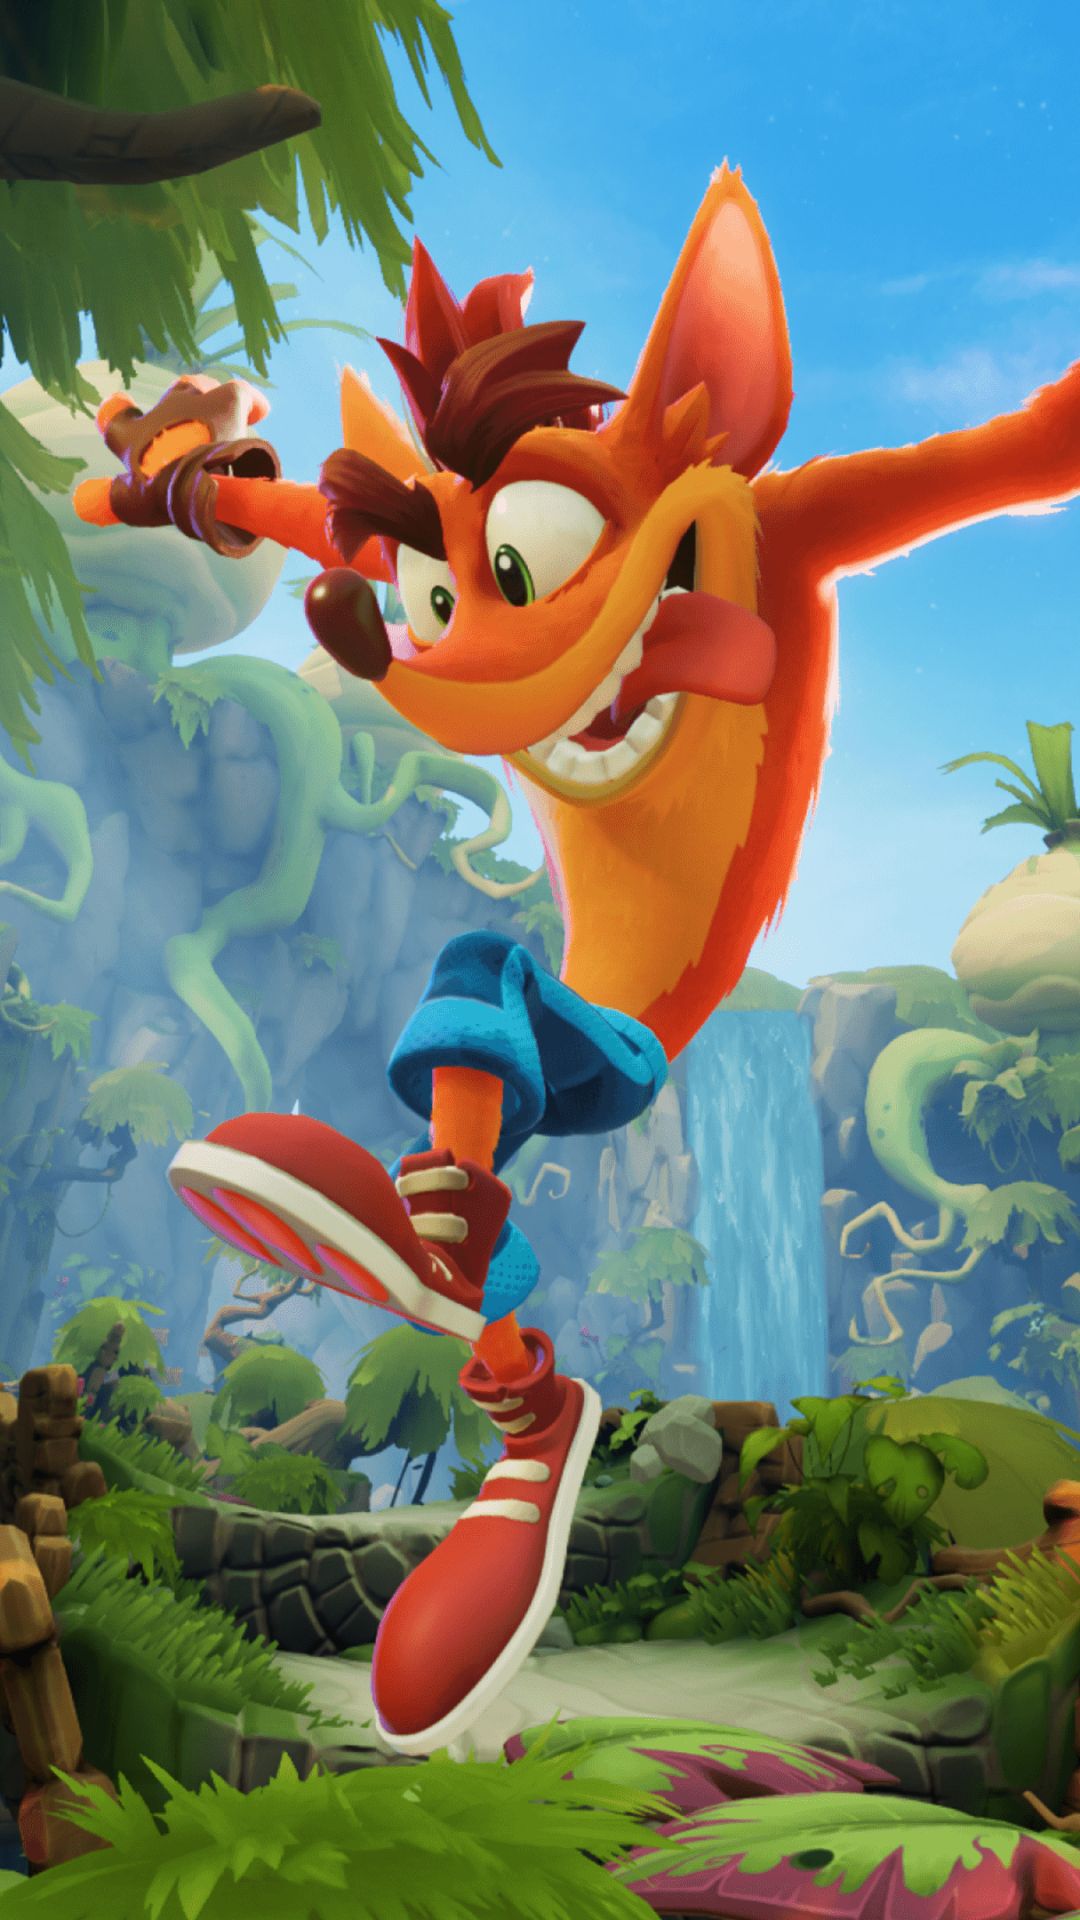 video game, crash bandicoot 4: it's about time, crash bandicoot 4 it’s about time, crash bandicoot